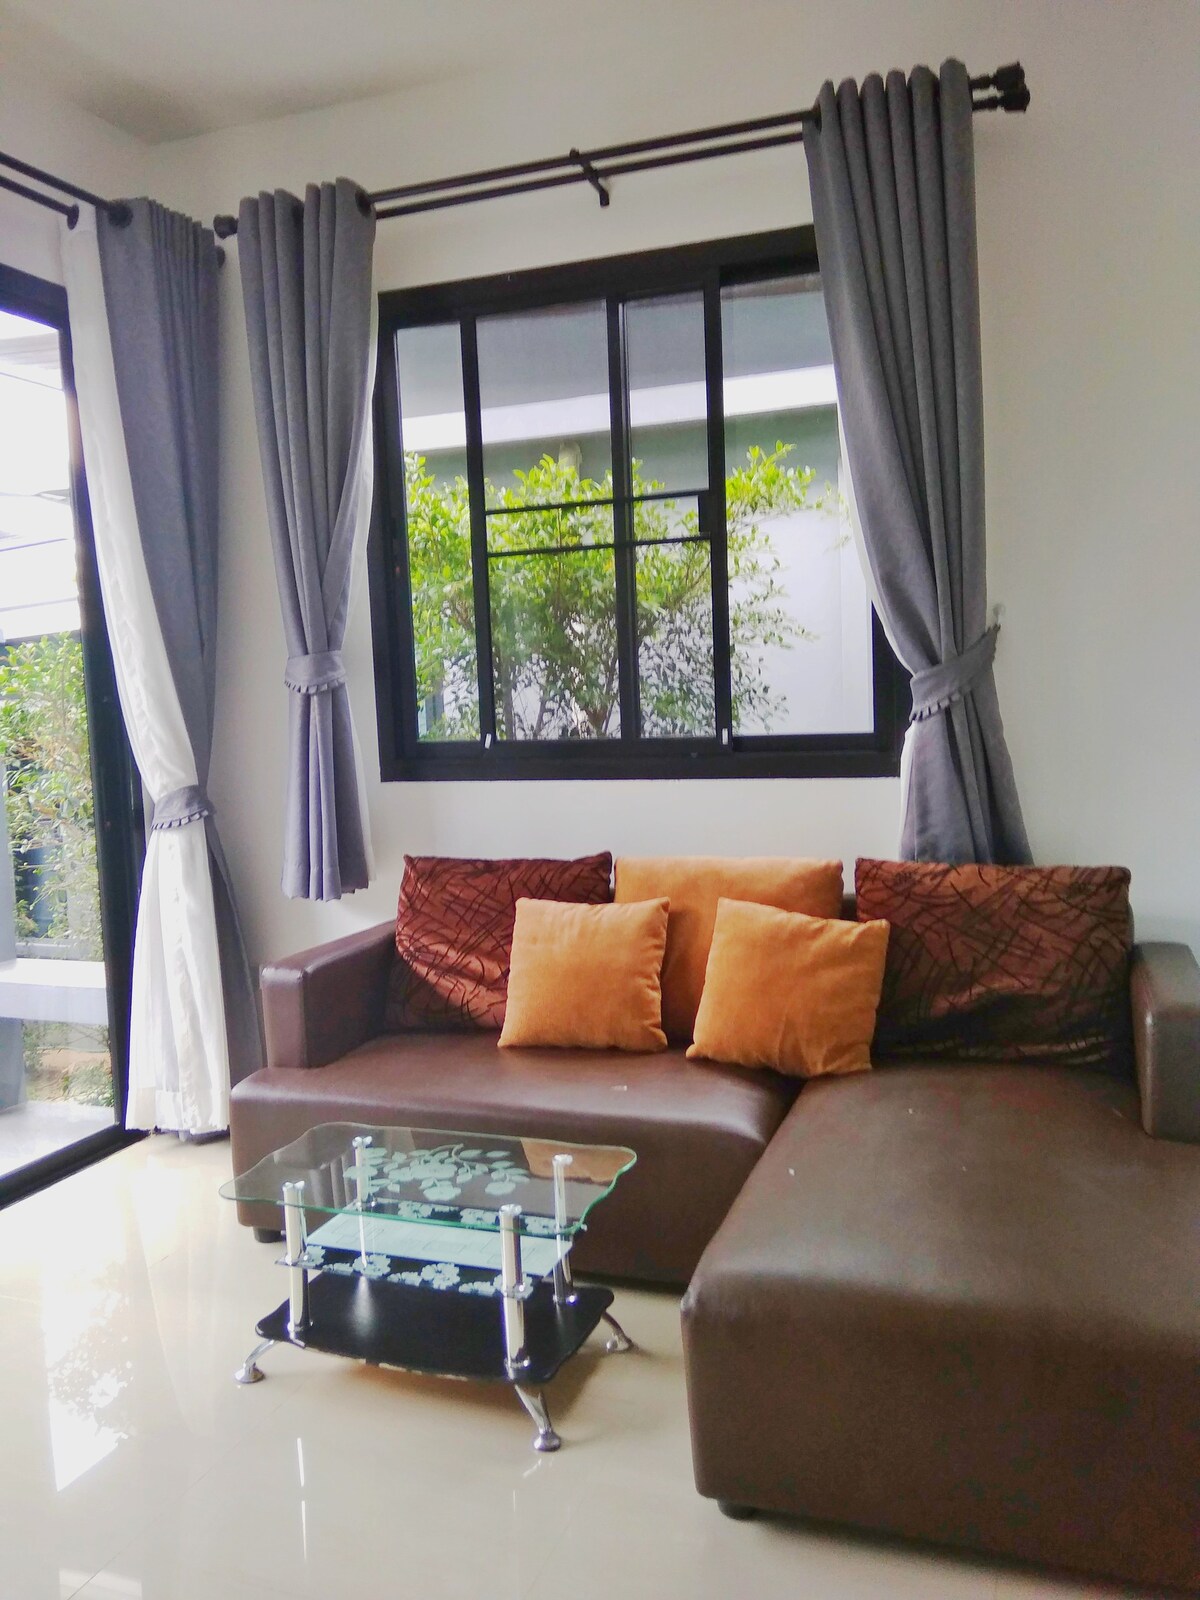 New!Delux Bungalow Samui/entire bungalow with pool